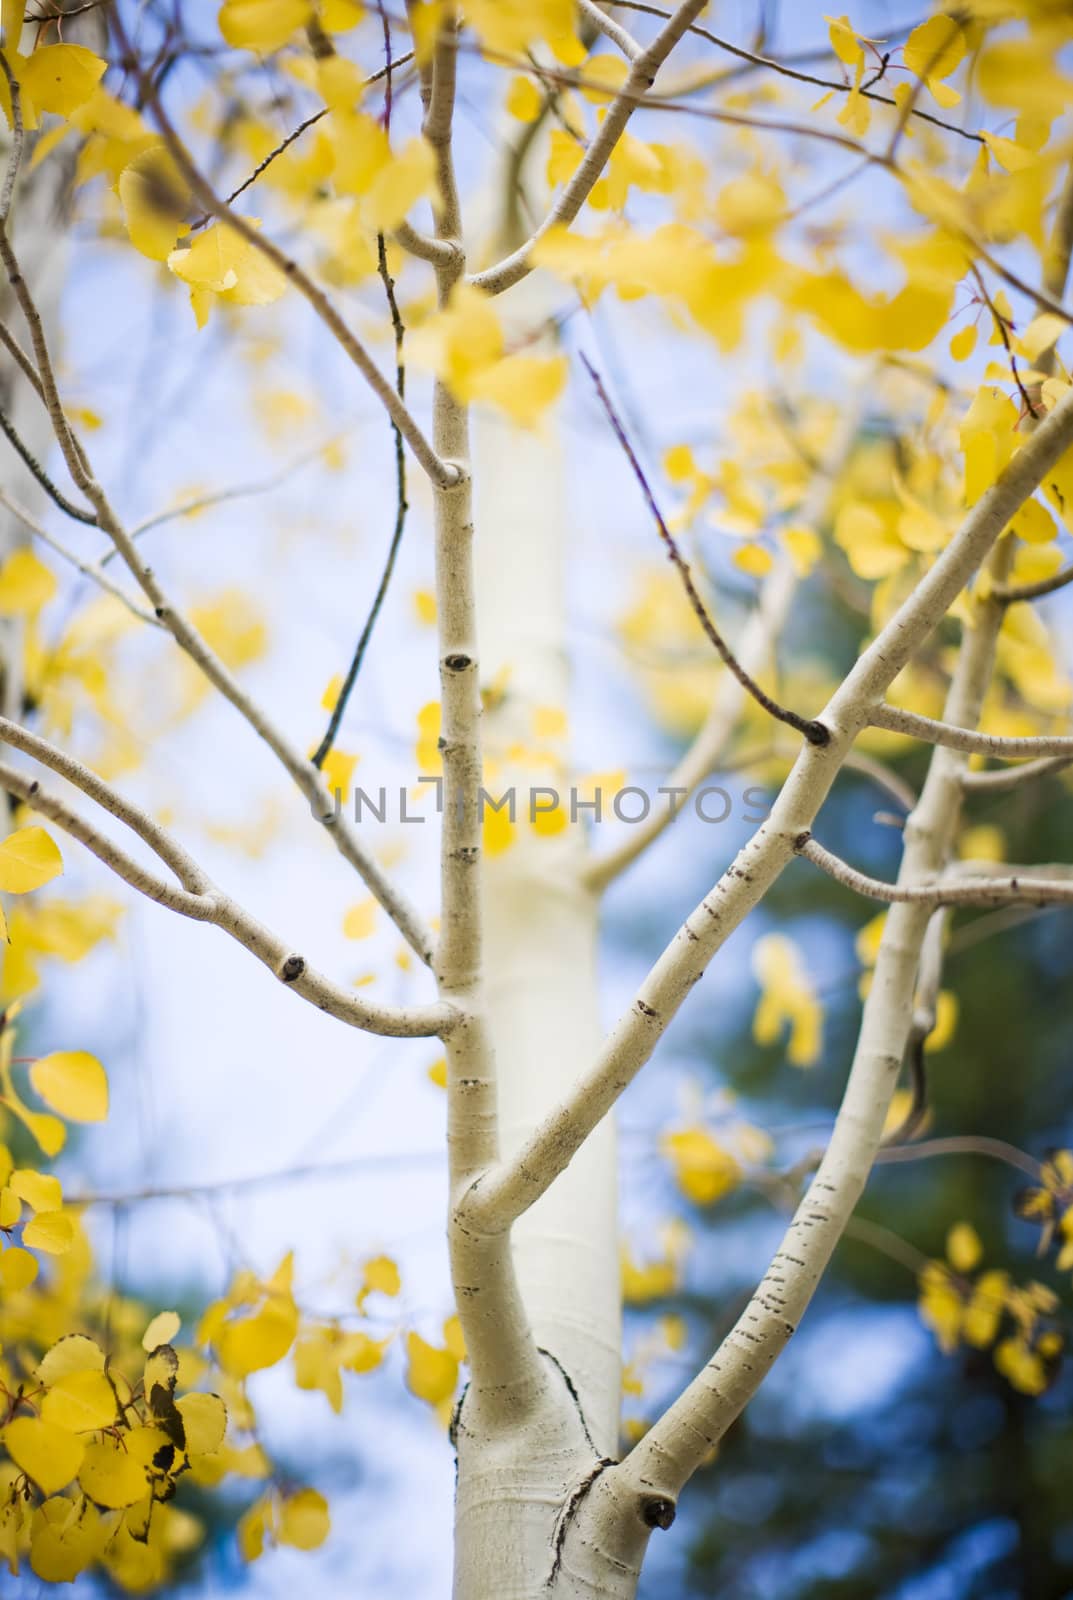 close-up view of yellow leaves changing on an aspen in the fall with a blue sky in the background